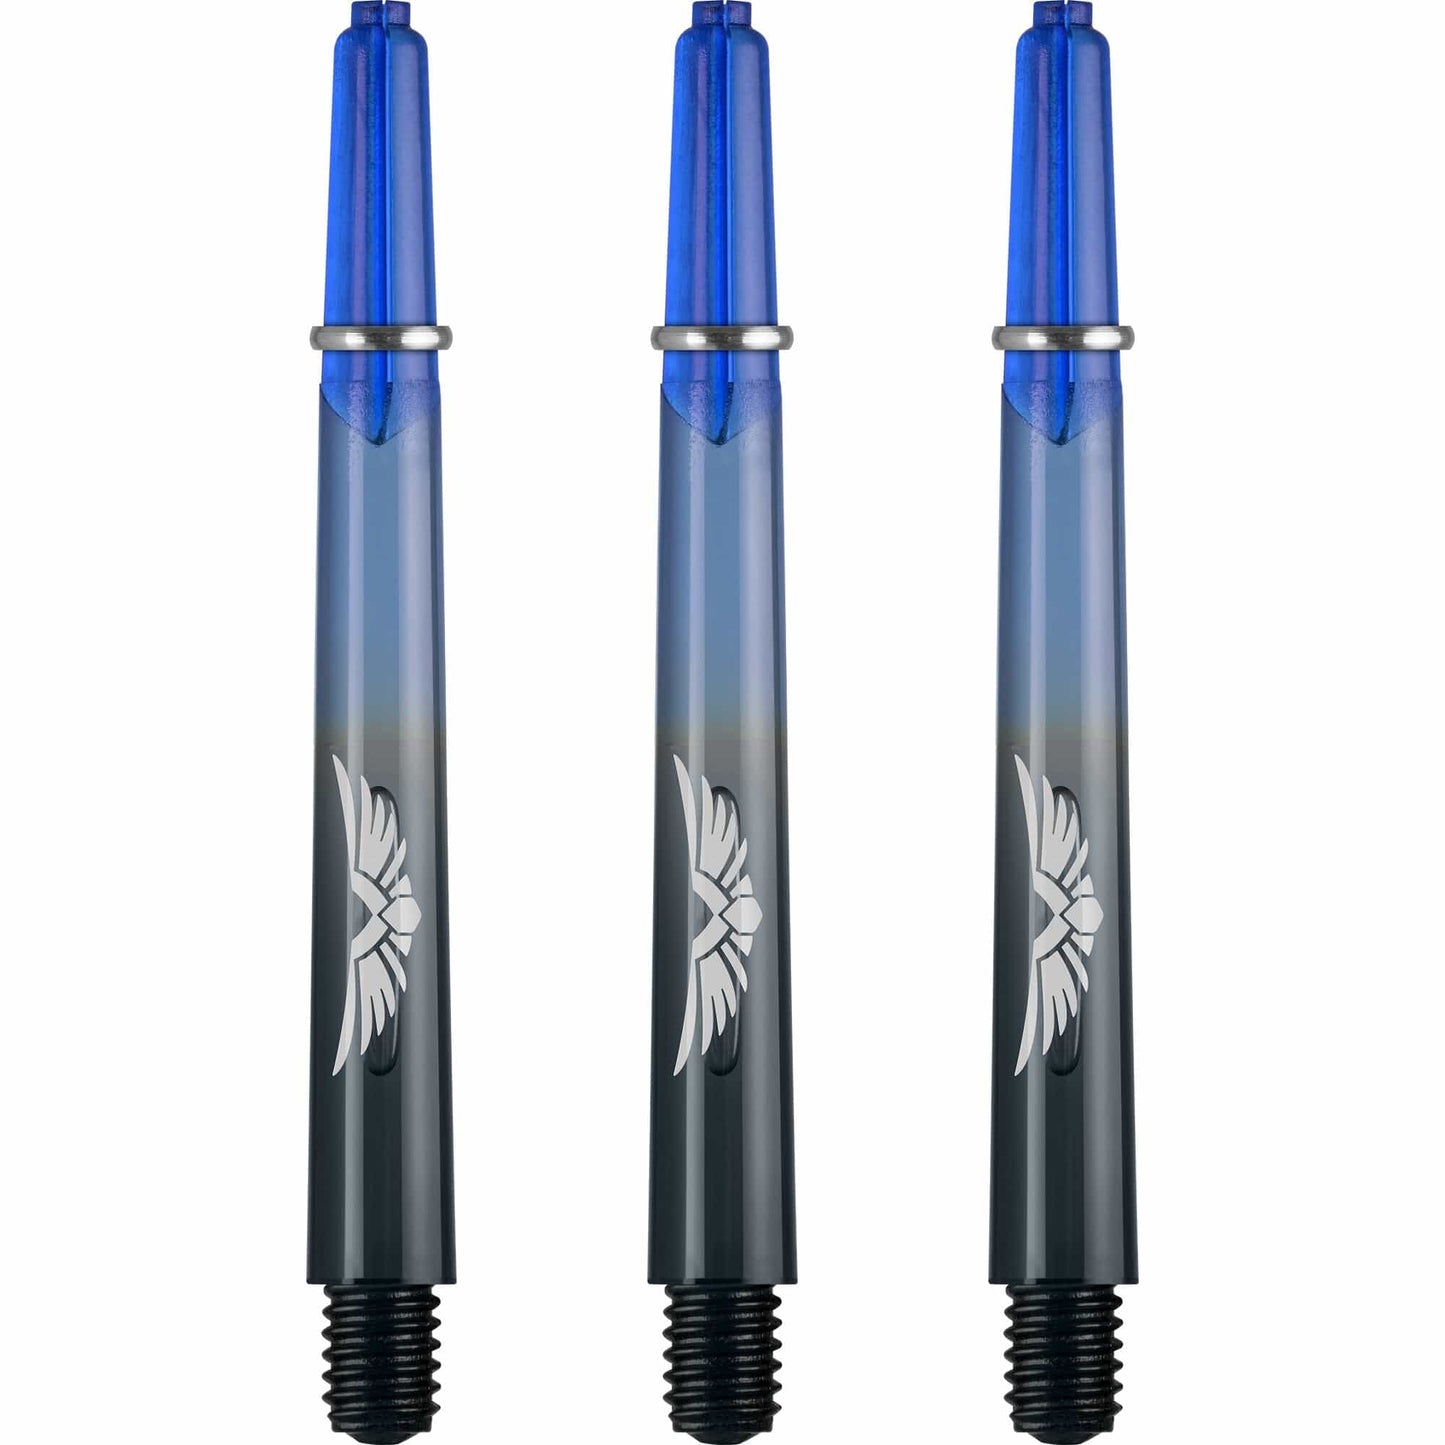 Shot Eagle Claw Dart Shafts - with Machined Rings - Strong Polycarbonate Stems - Black Blue Medium